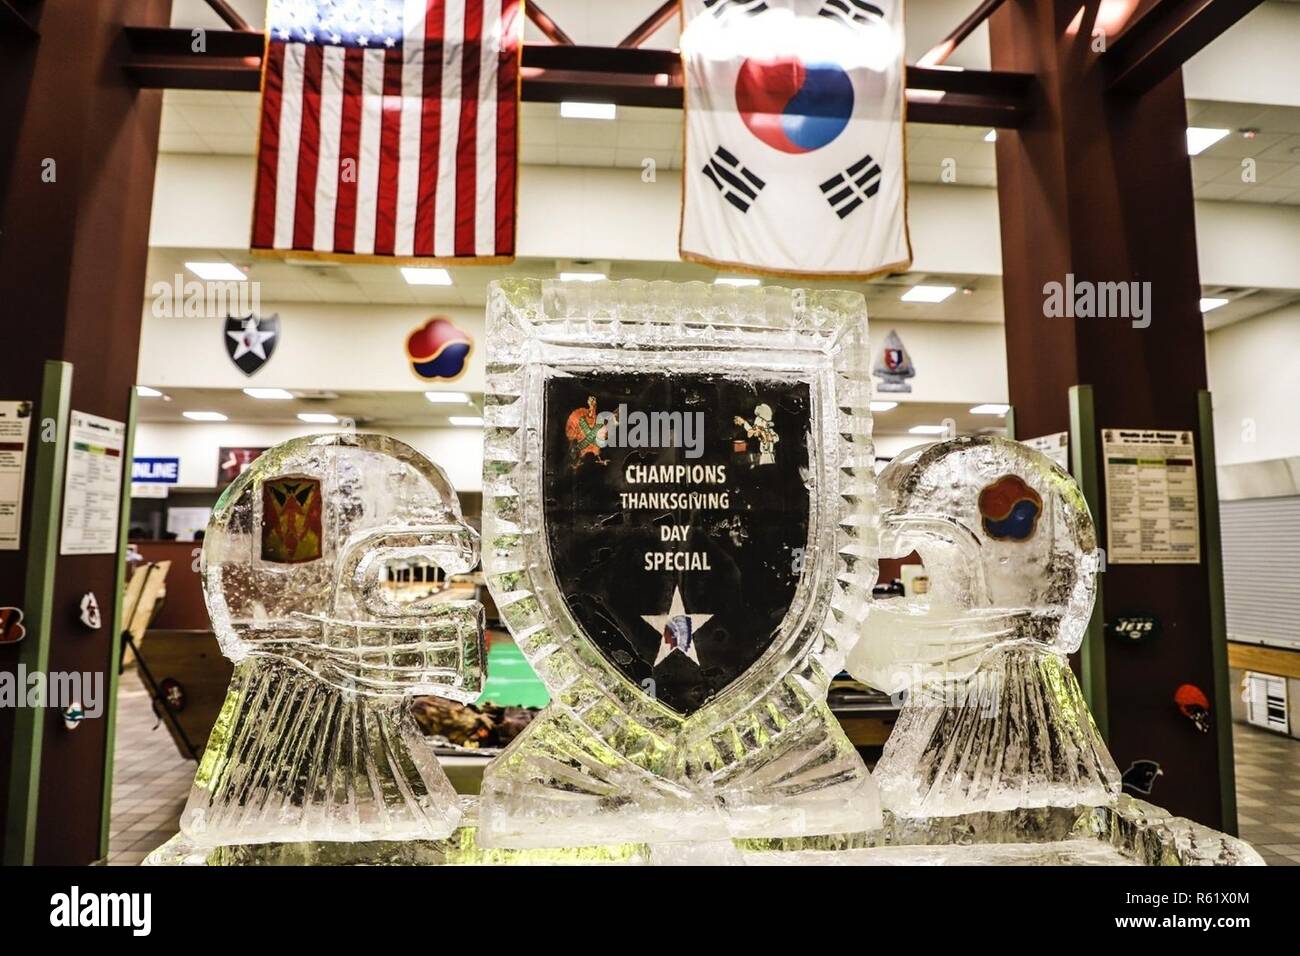 CAMP CARROLL, Republic of Korea - The Champion Cafe displays a unique, football-themed ice sculpture for their Thanksgiving meal to give Soldiers a taste of home, build morale and esprit de corps Nov. 22. Each dining facility created a unique display to create a welcoming, festive environment. Stock Photo